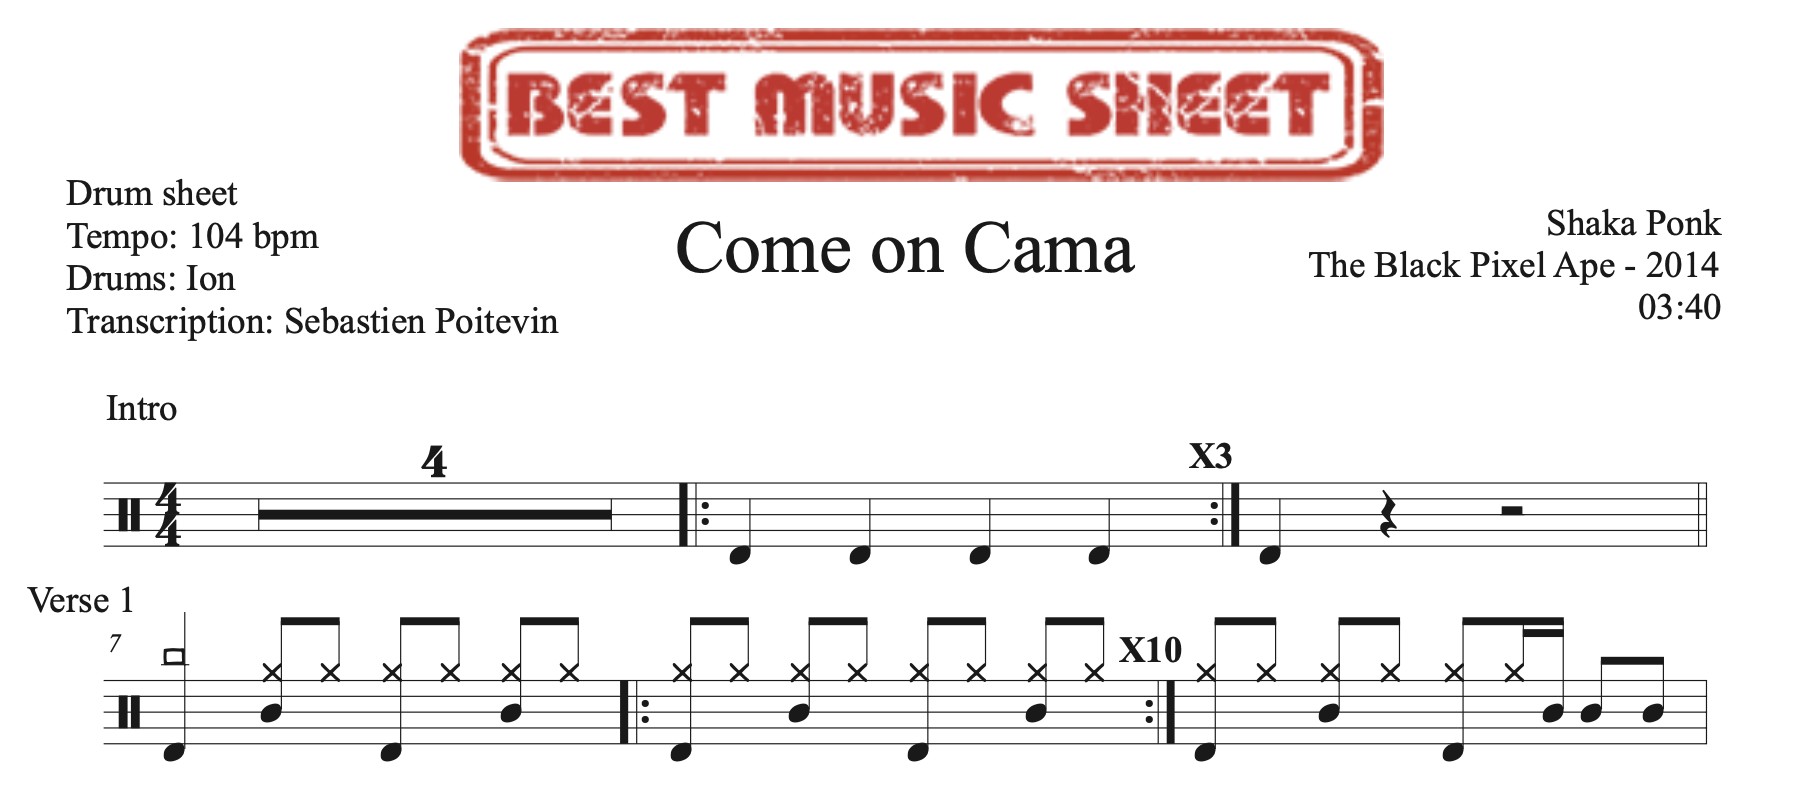 sample of the drum sheet of Come on Cama by Shaka Ponk